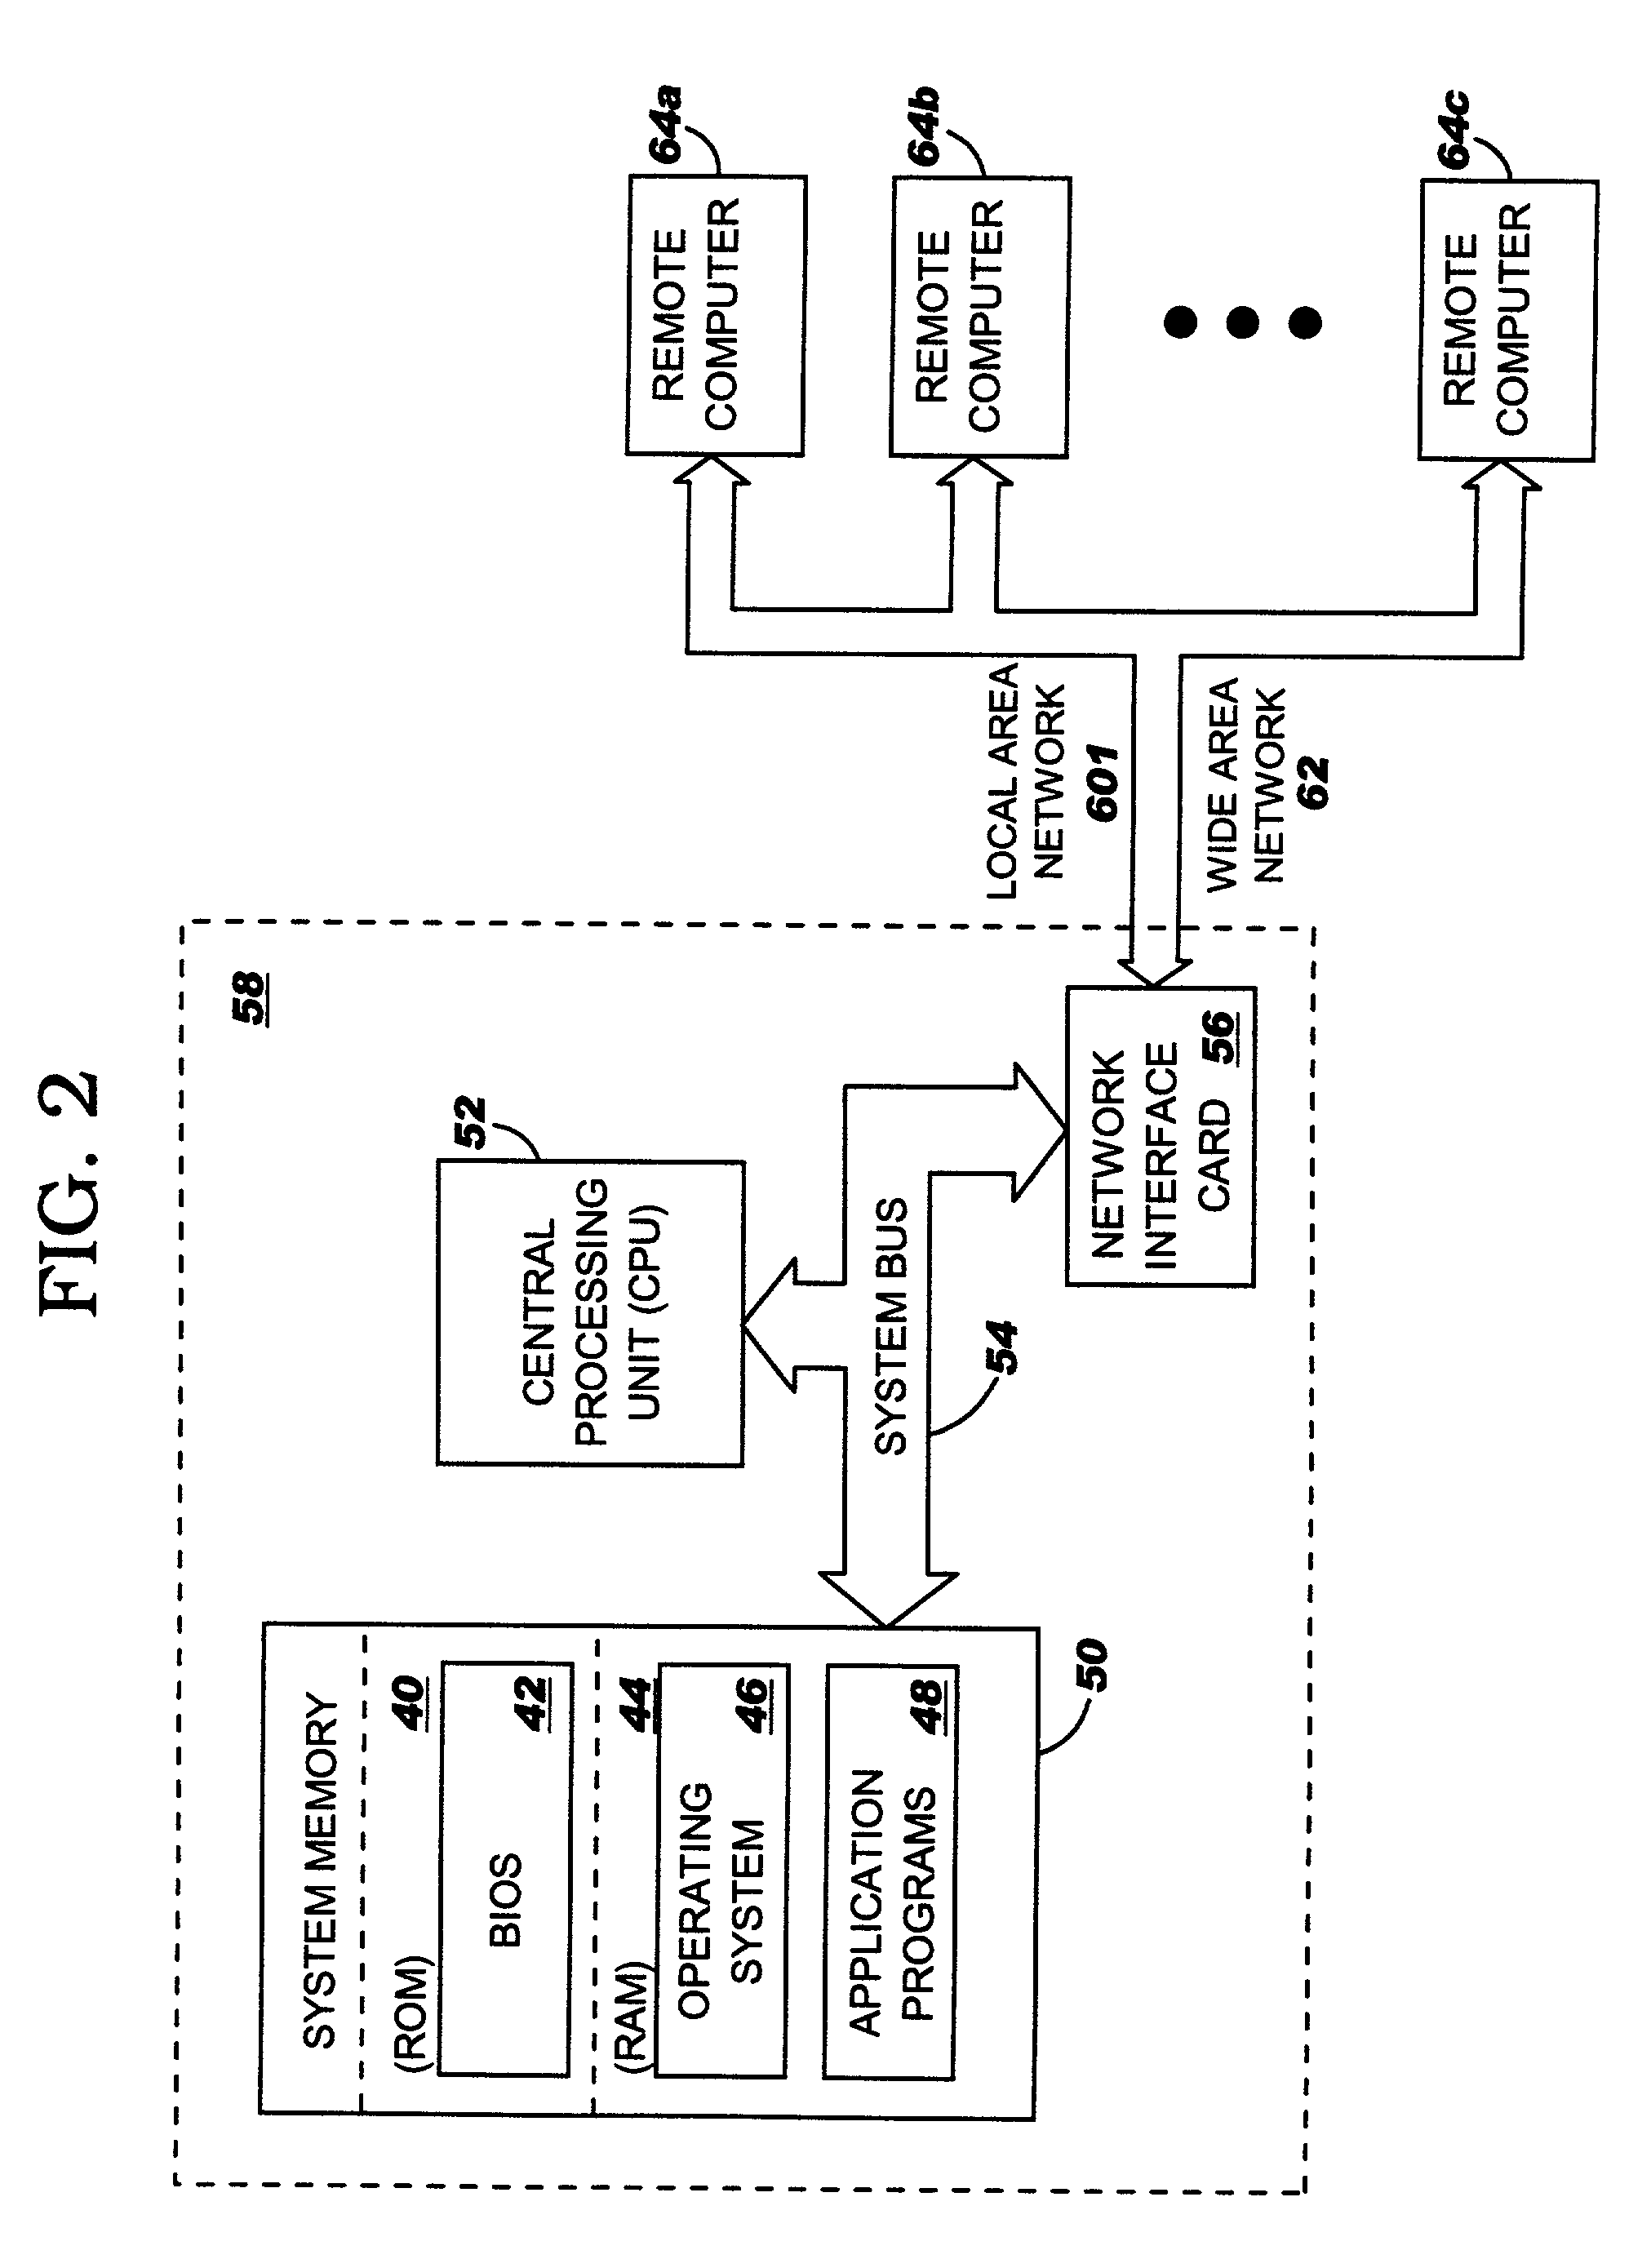 Secure method and system to prevent internal unauthorized remotely initiated power up events in computer systems